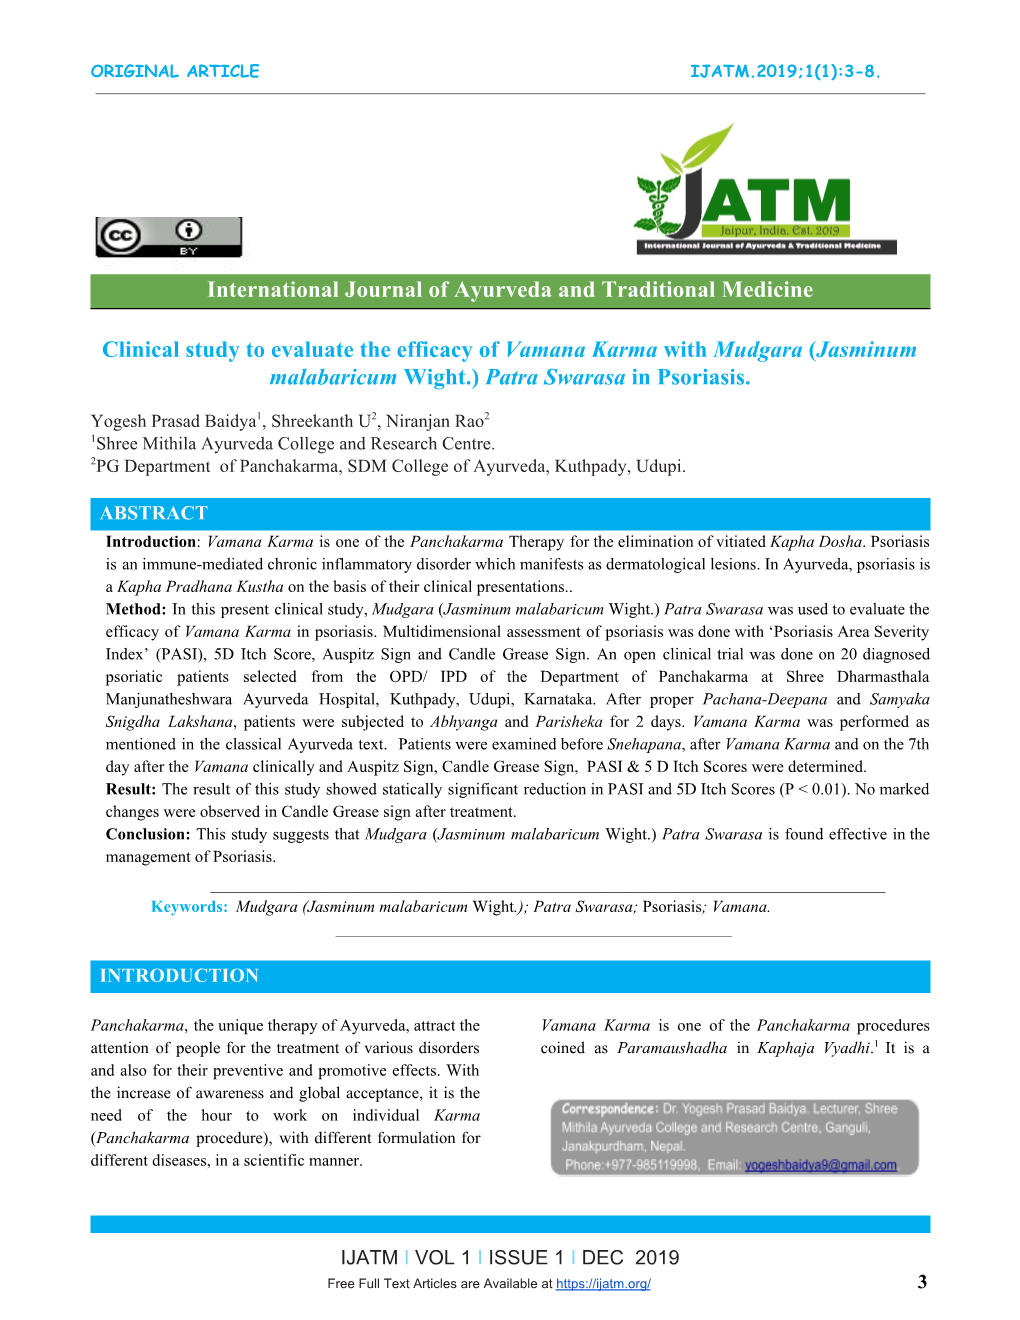 International Journal of Ayurveda and Traditional Medicine Clinical Study to Evaluate the Efficacy of ​Vamana Karma​ with M